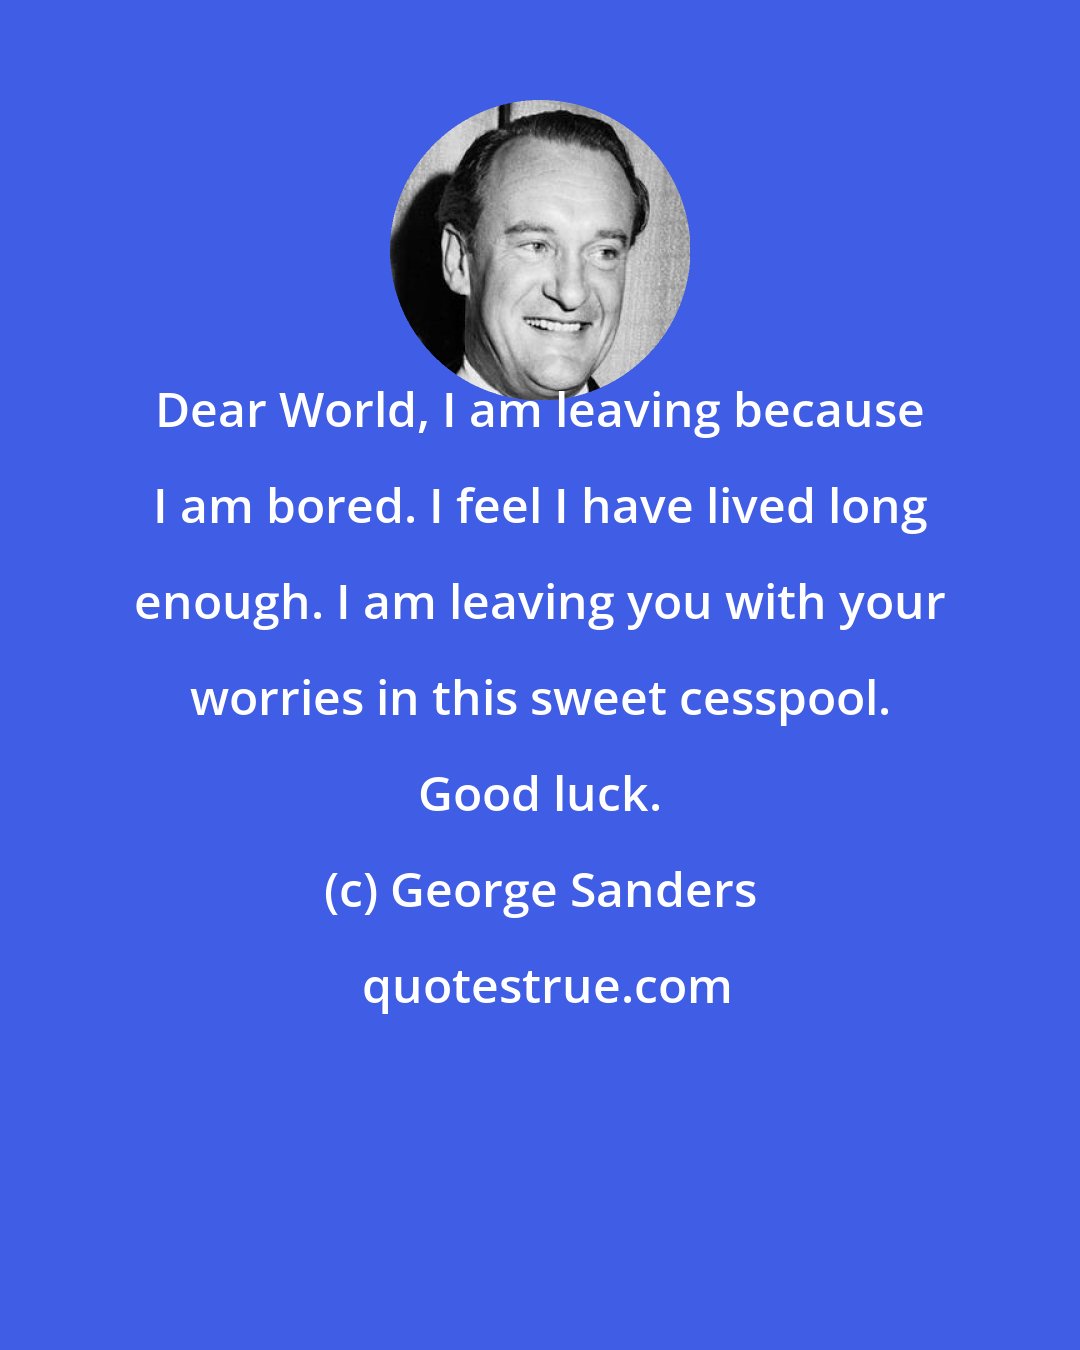 George Sanders: Dear World, I am leaving because I am bored. I feel I have lived long enough. I am leaving you with your worries in this sweet cesspool. Good luck.